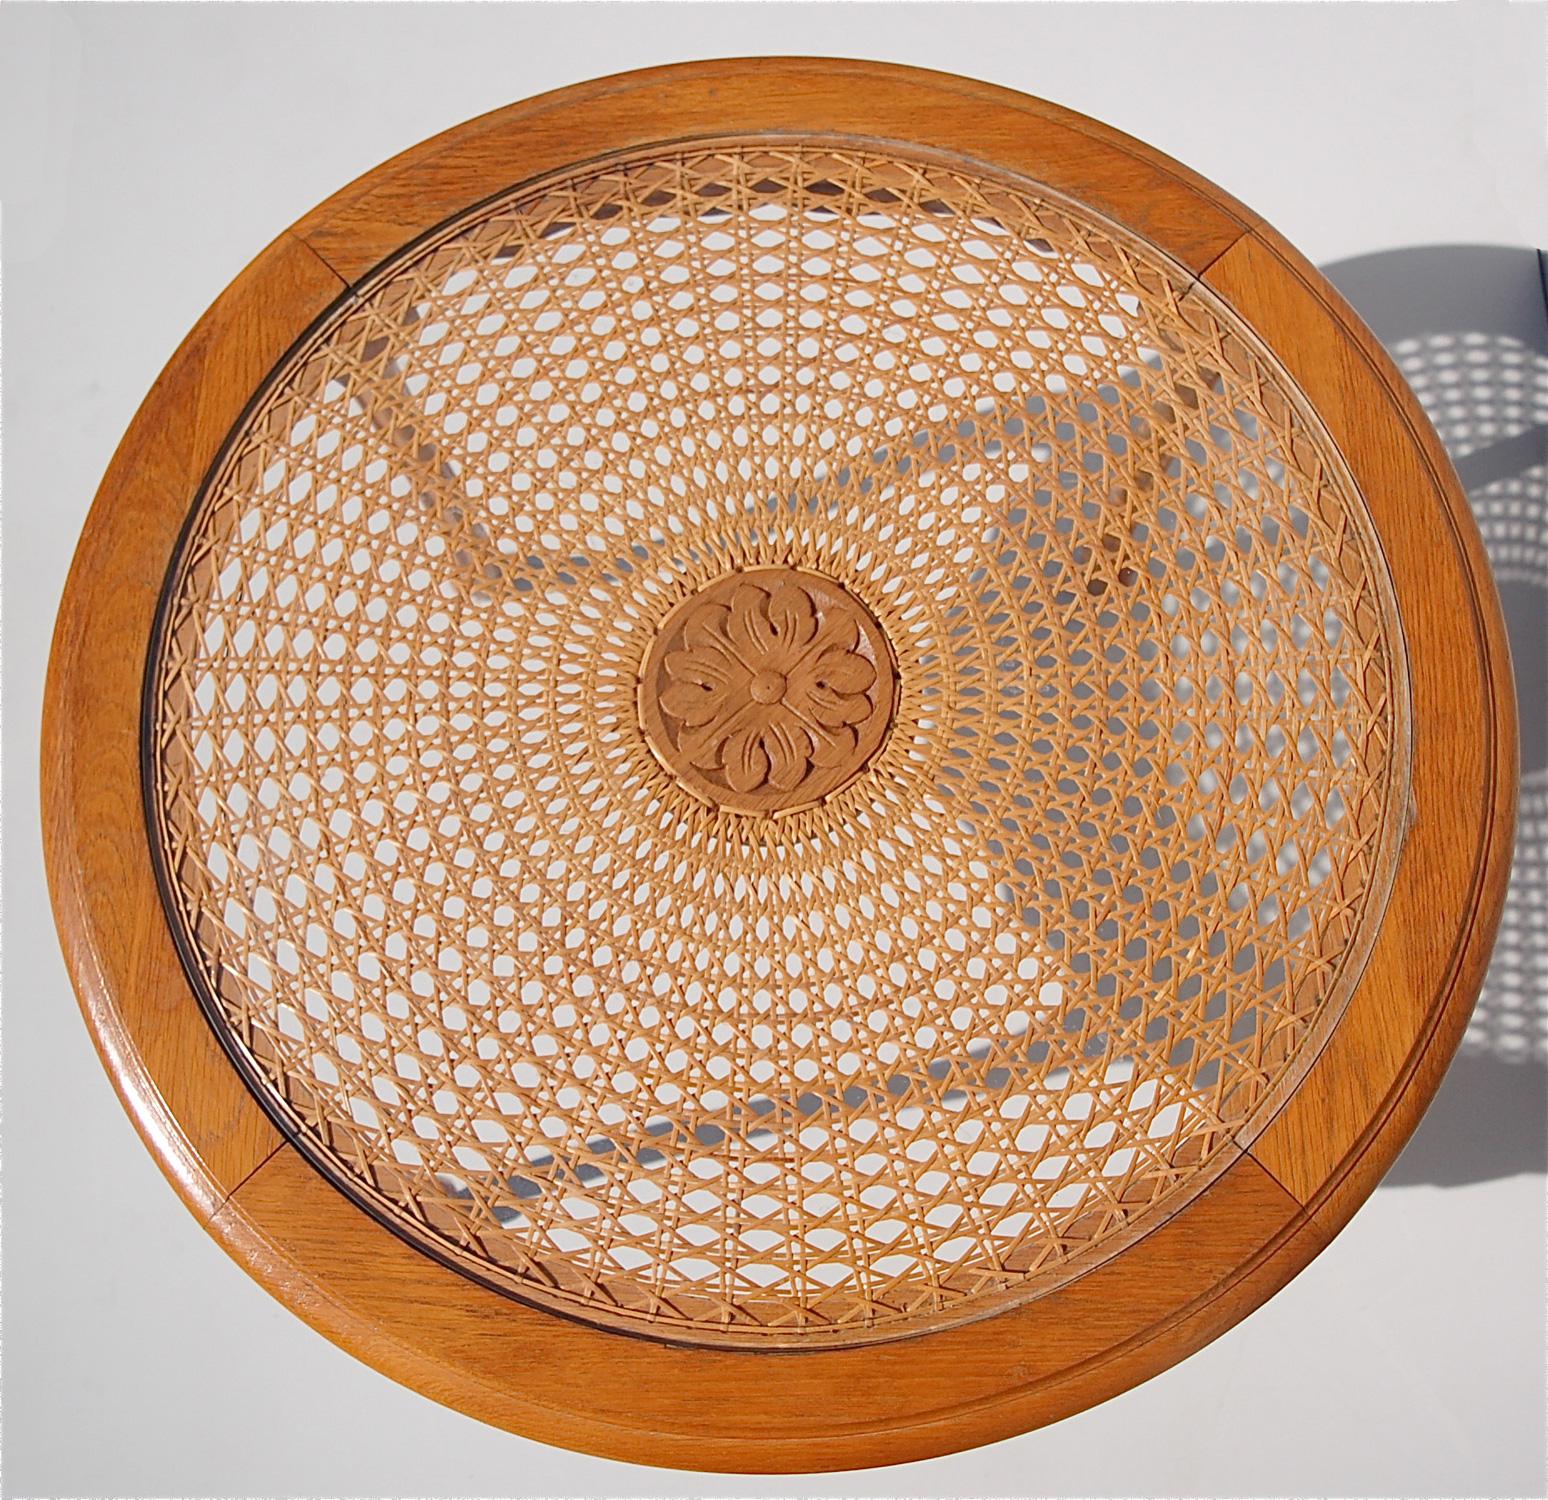 This French, vintage, round coffee or cocktail table has been carved from solid oak. It has a sunburst pattern caned top with a plate glass insert which can be removed. In the center of the cane work is a carved oak medallion. Because of its modest